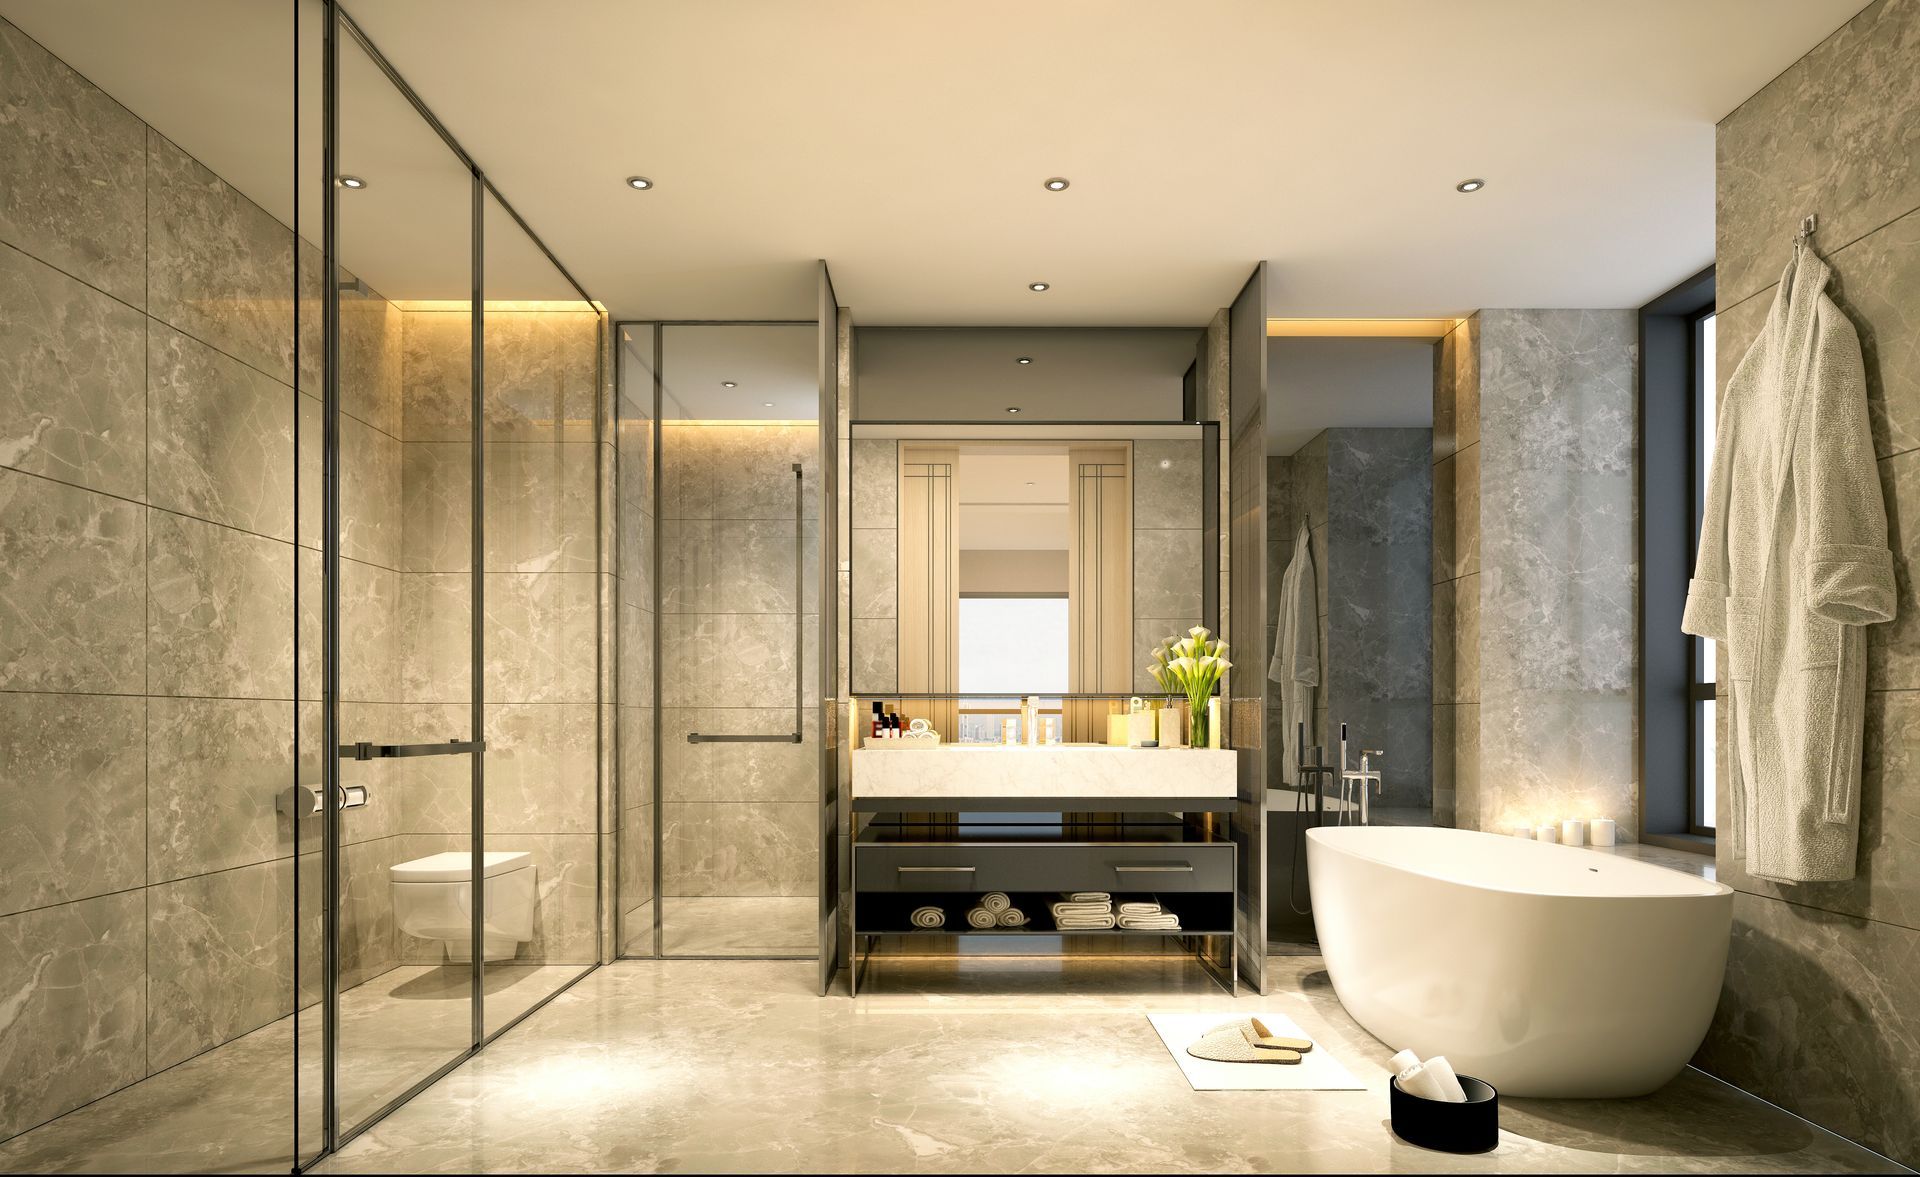 Contemporary bathroom with sleek design, featuring a freestanding bathtub, glass-enclosed shower, and minimalist fixtures.